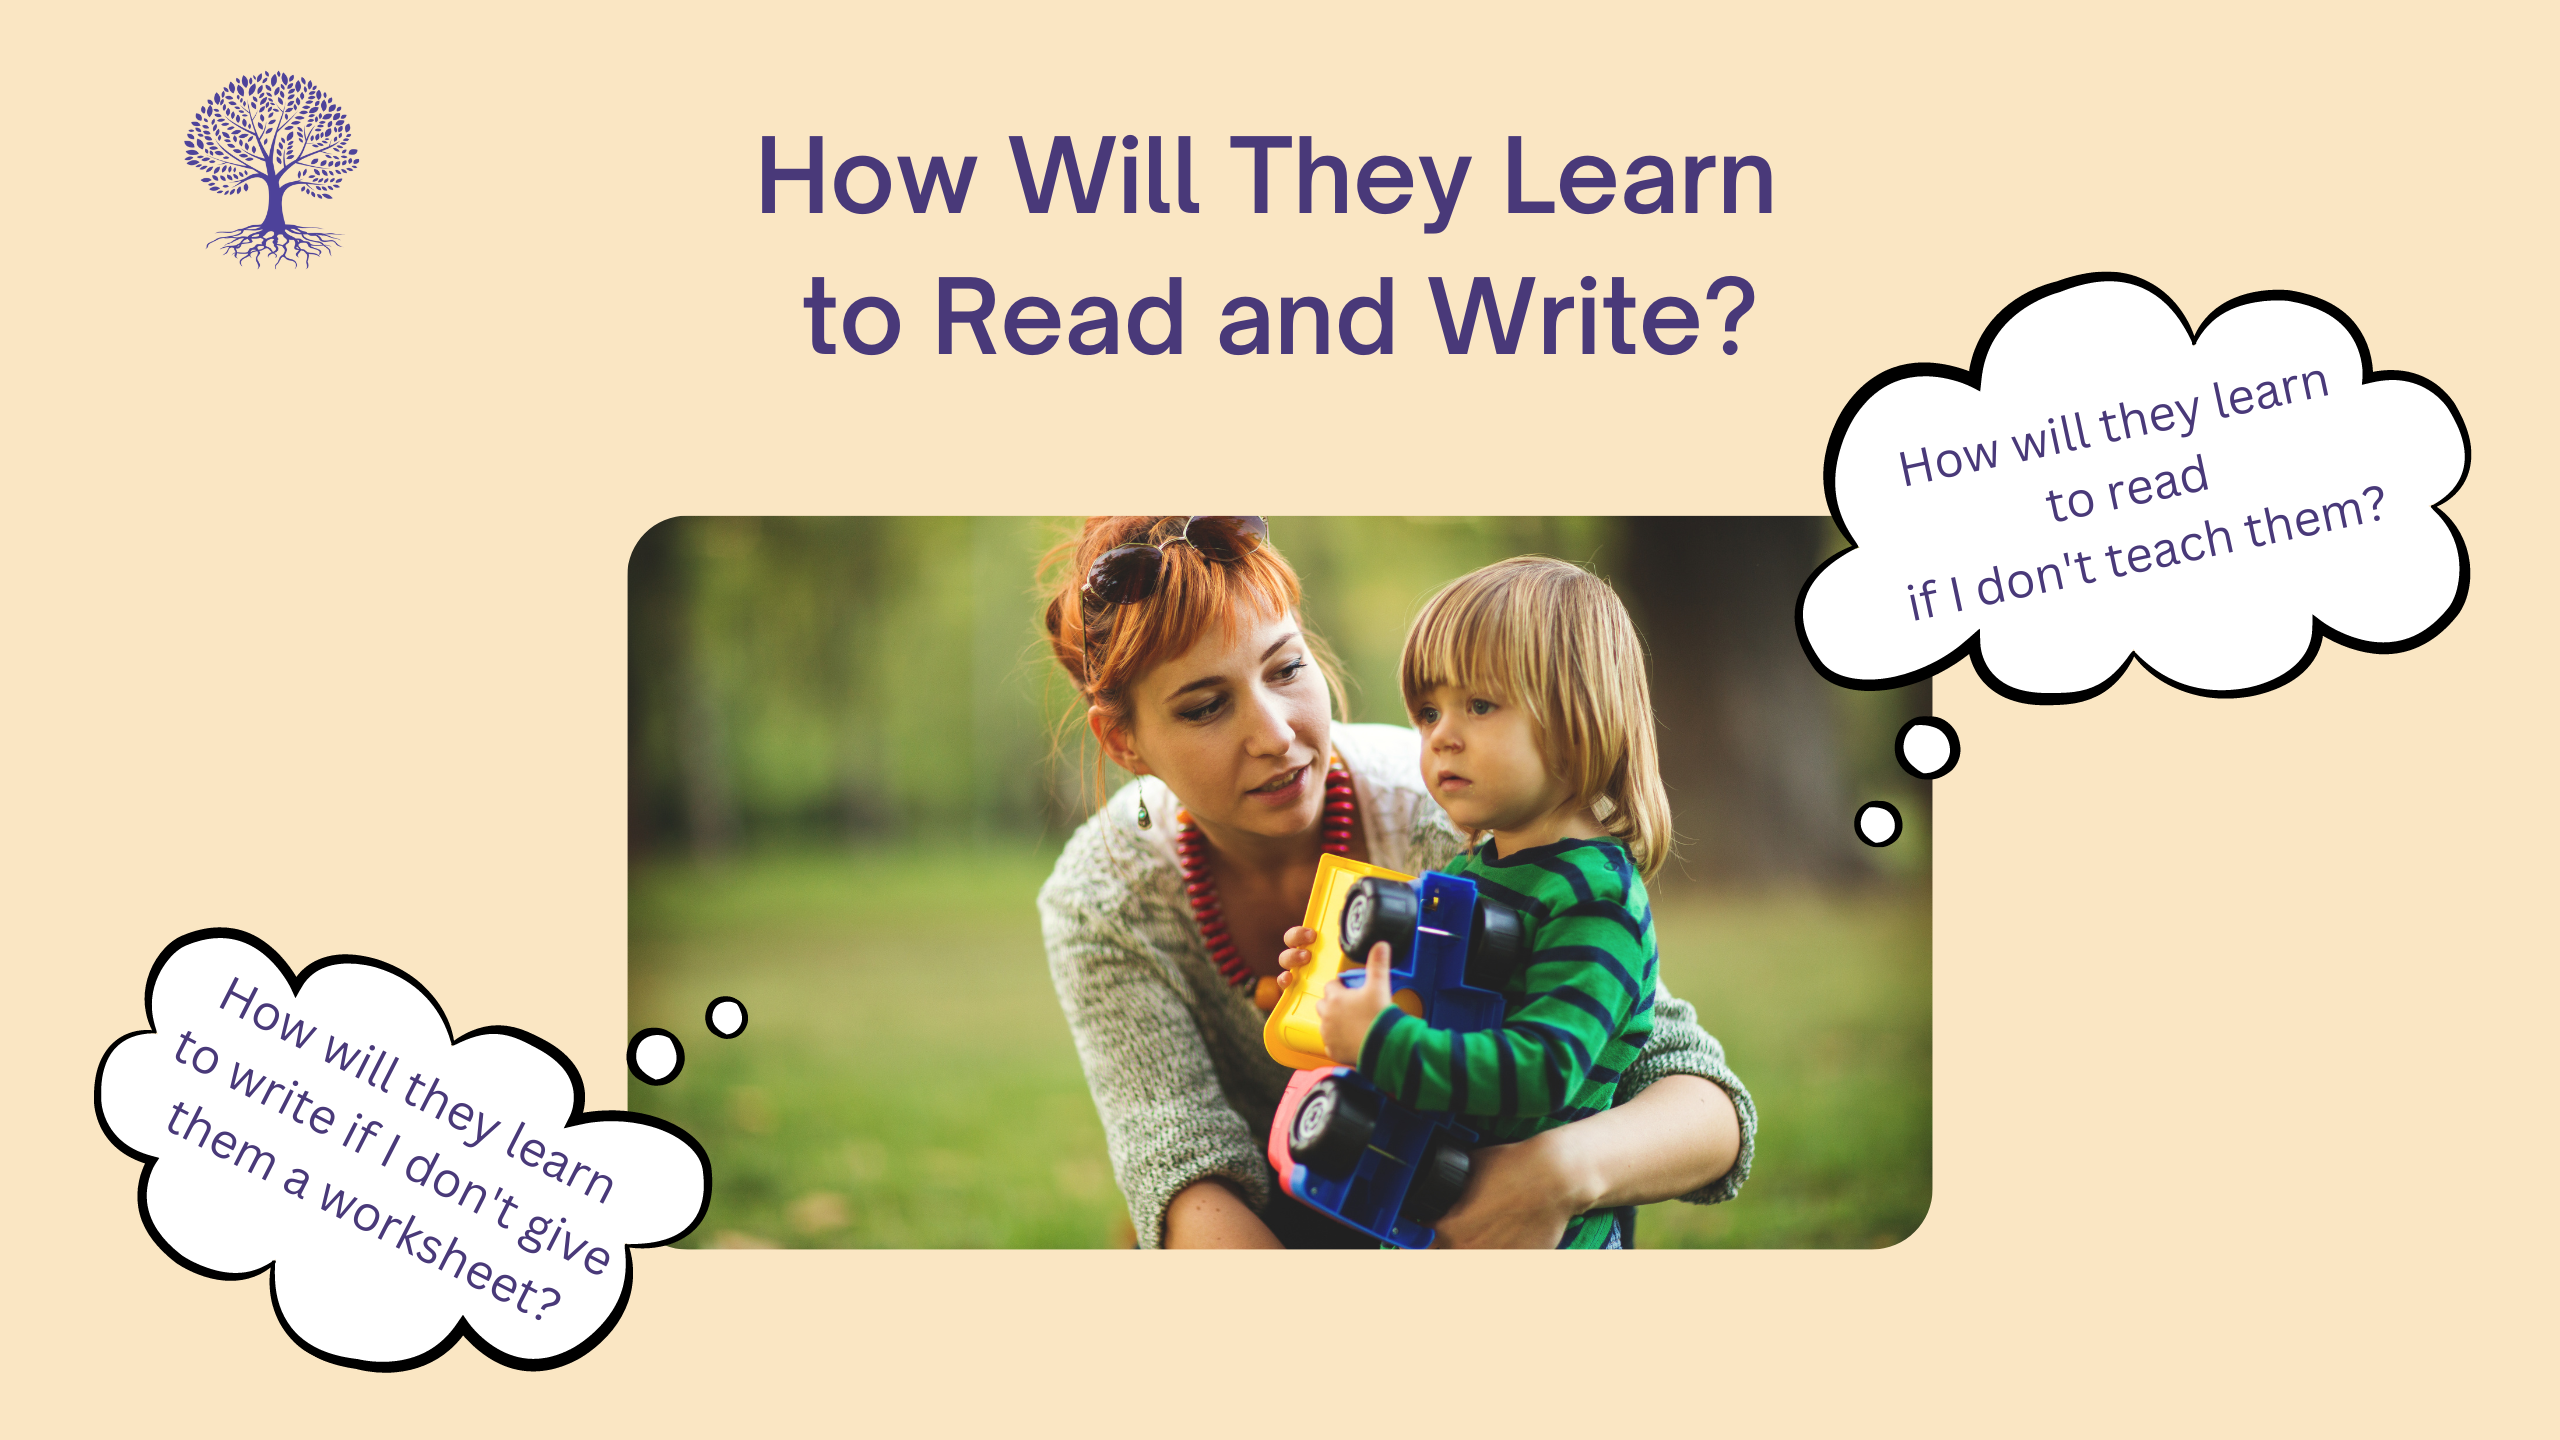 How Will They Learn to Read and Write?